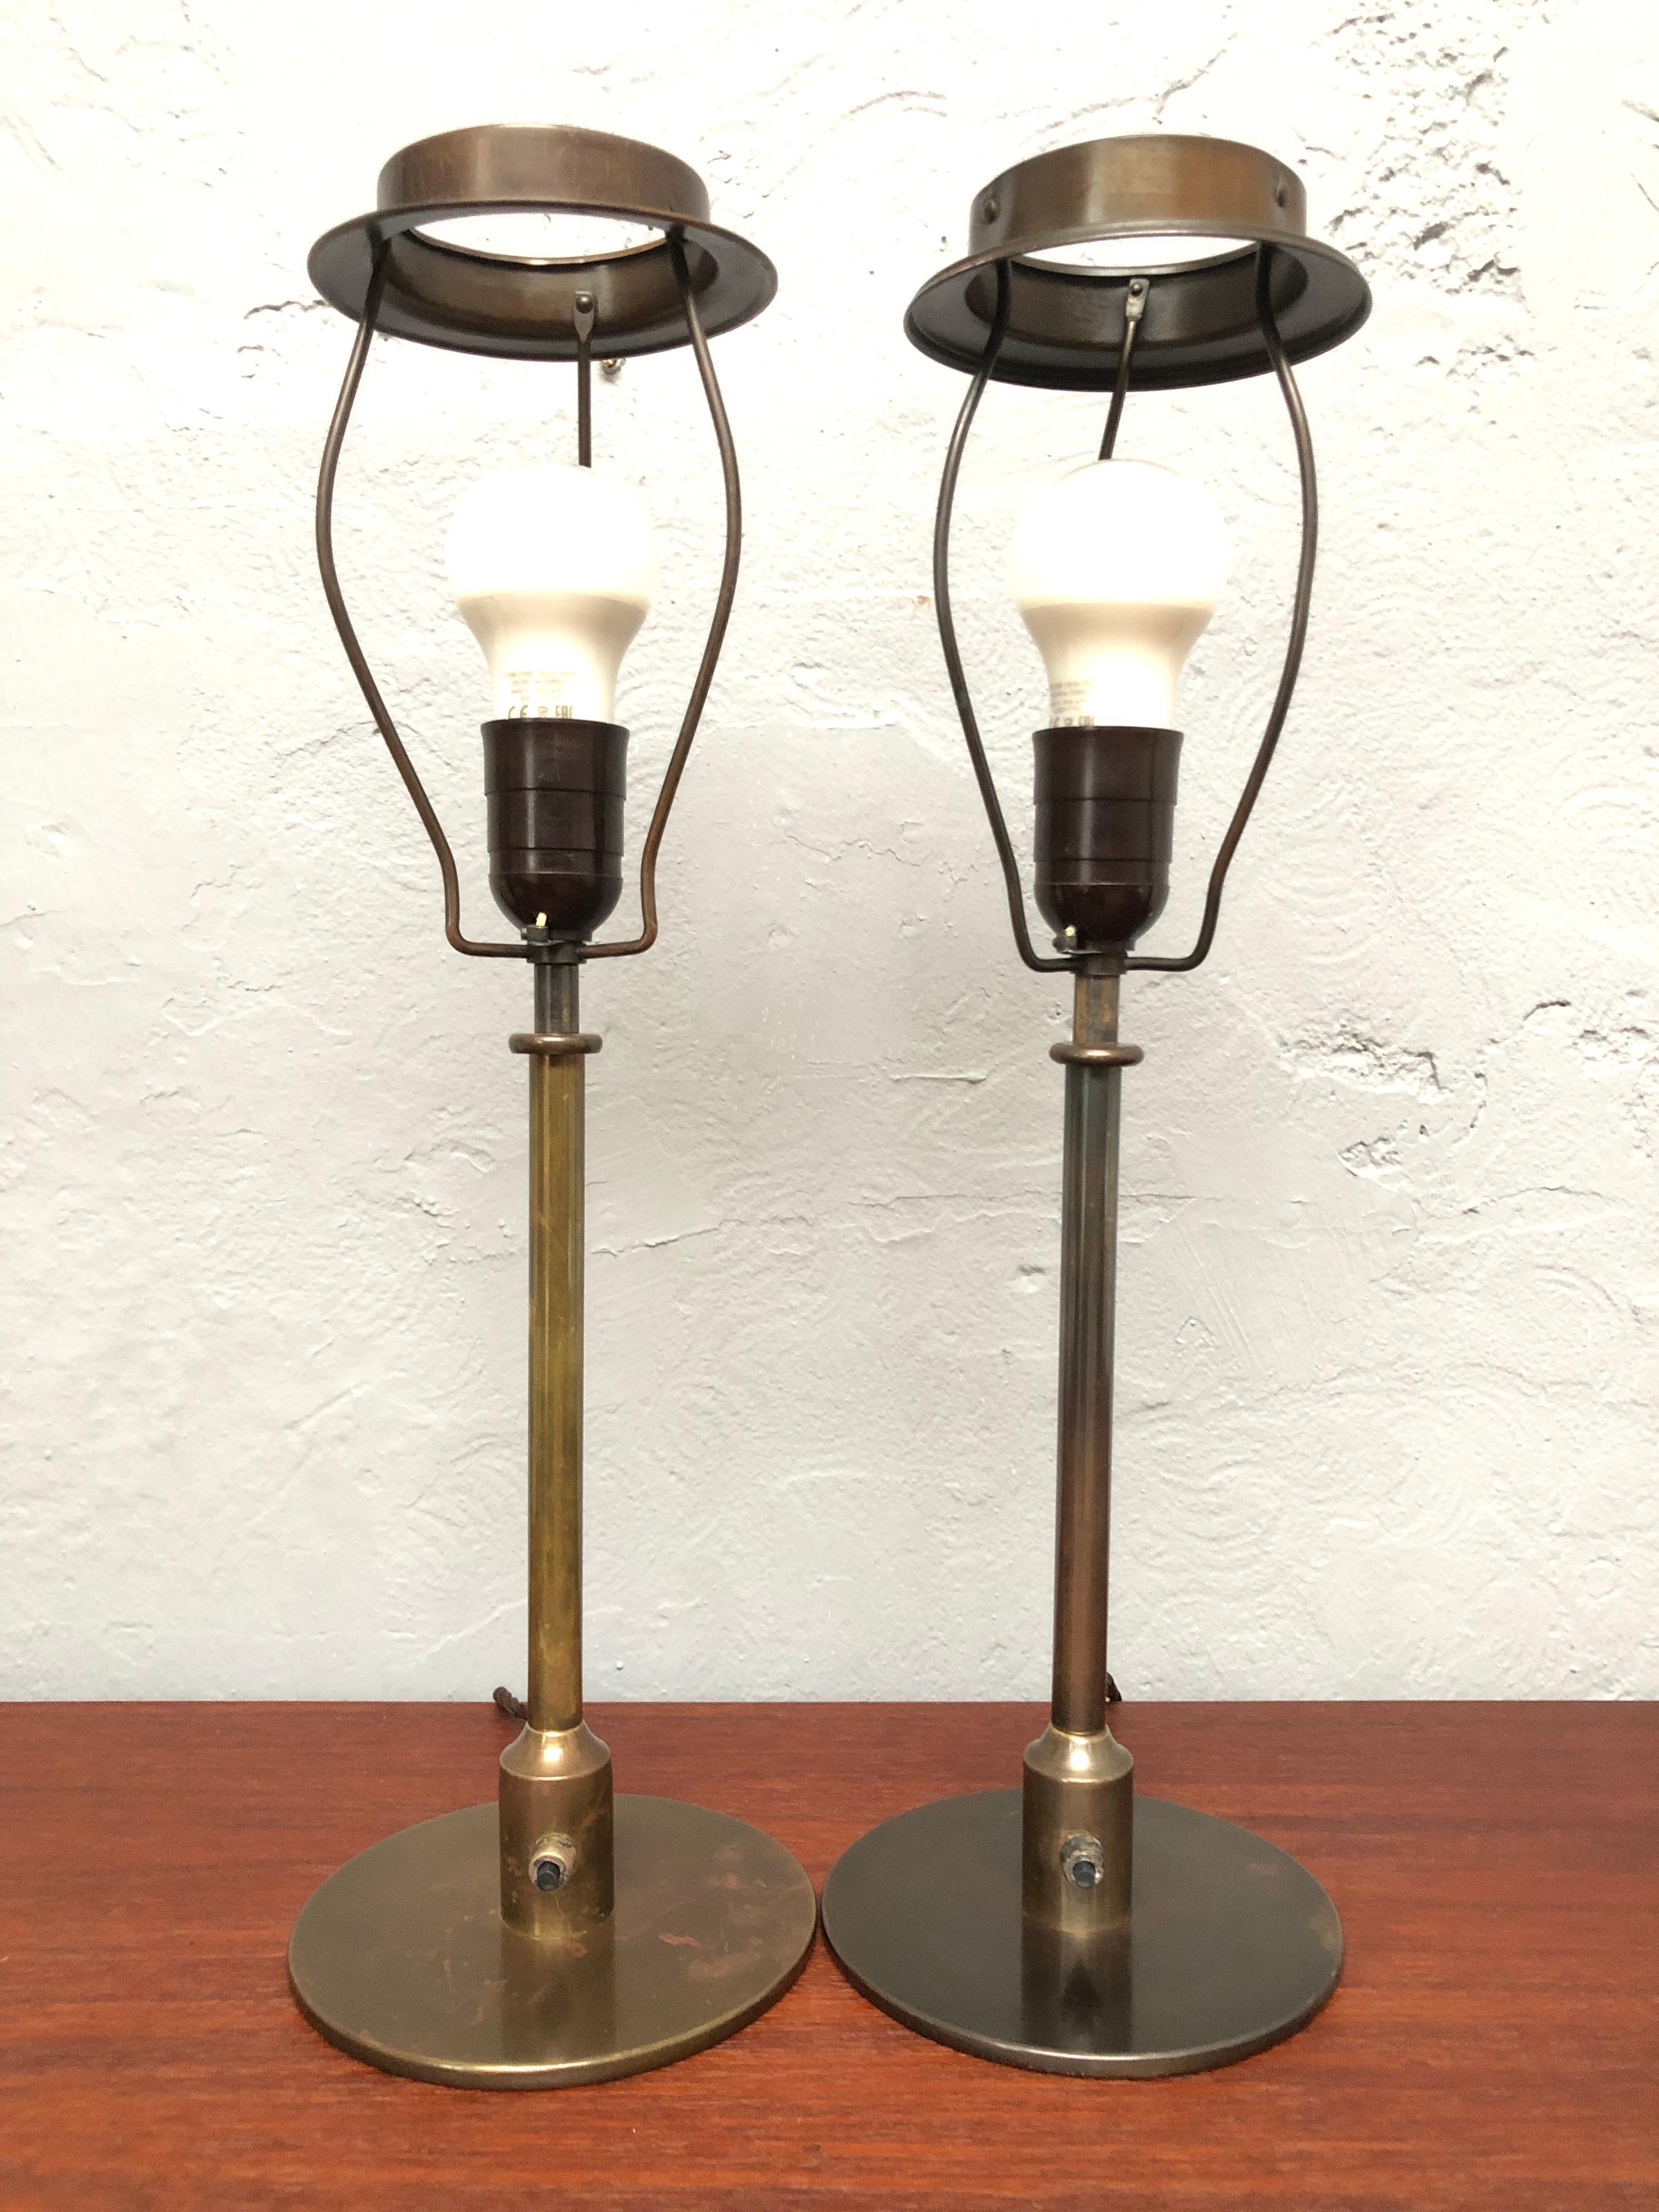 Pair of Vintage Brass Table Lamps by Fog & Mørup Lamp Makers from the 1940s For Sale 5